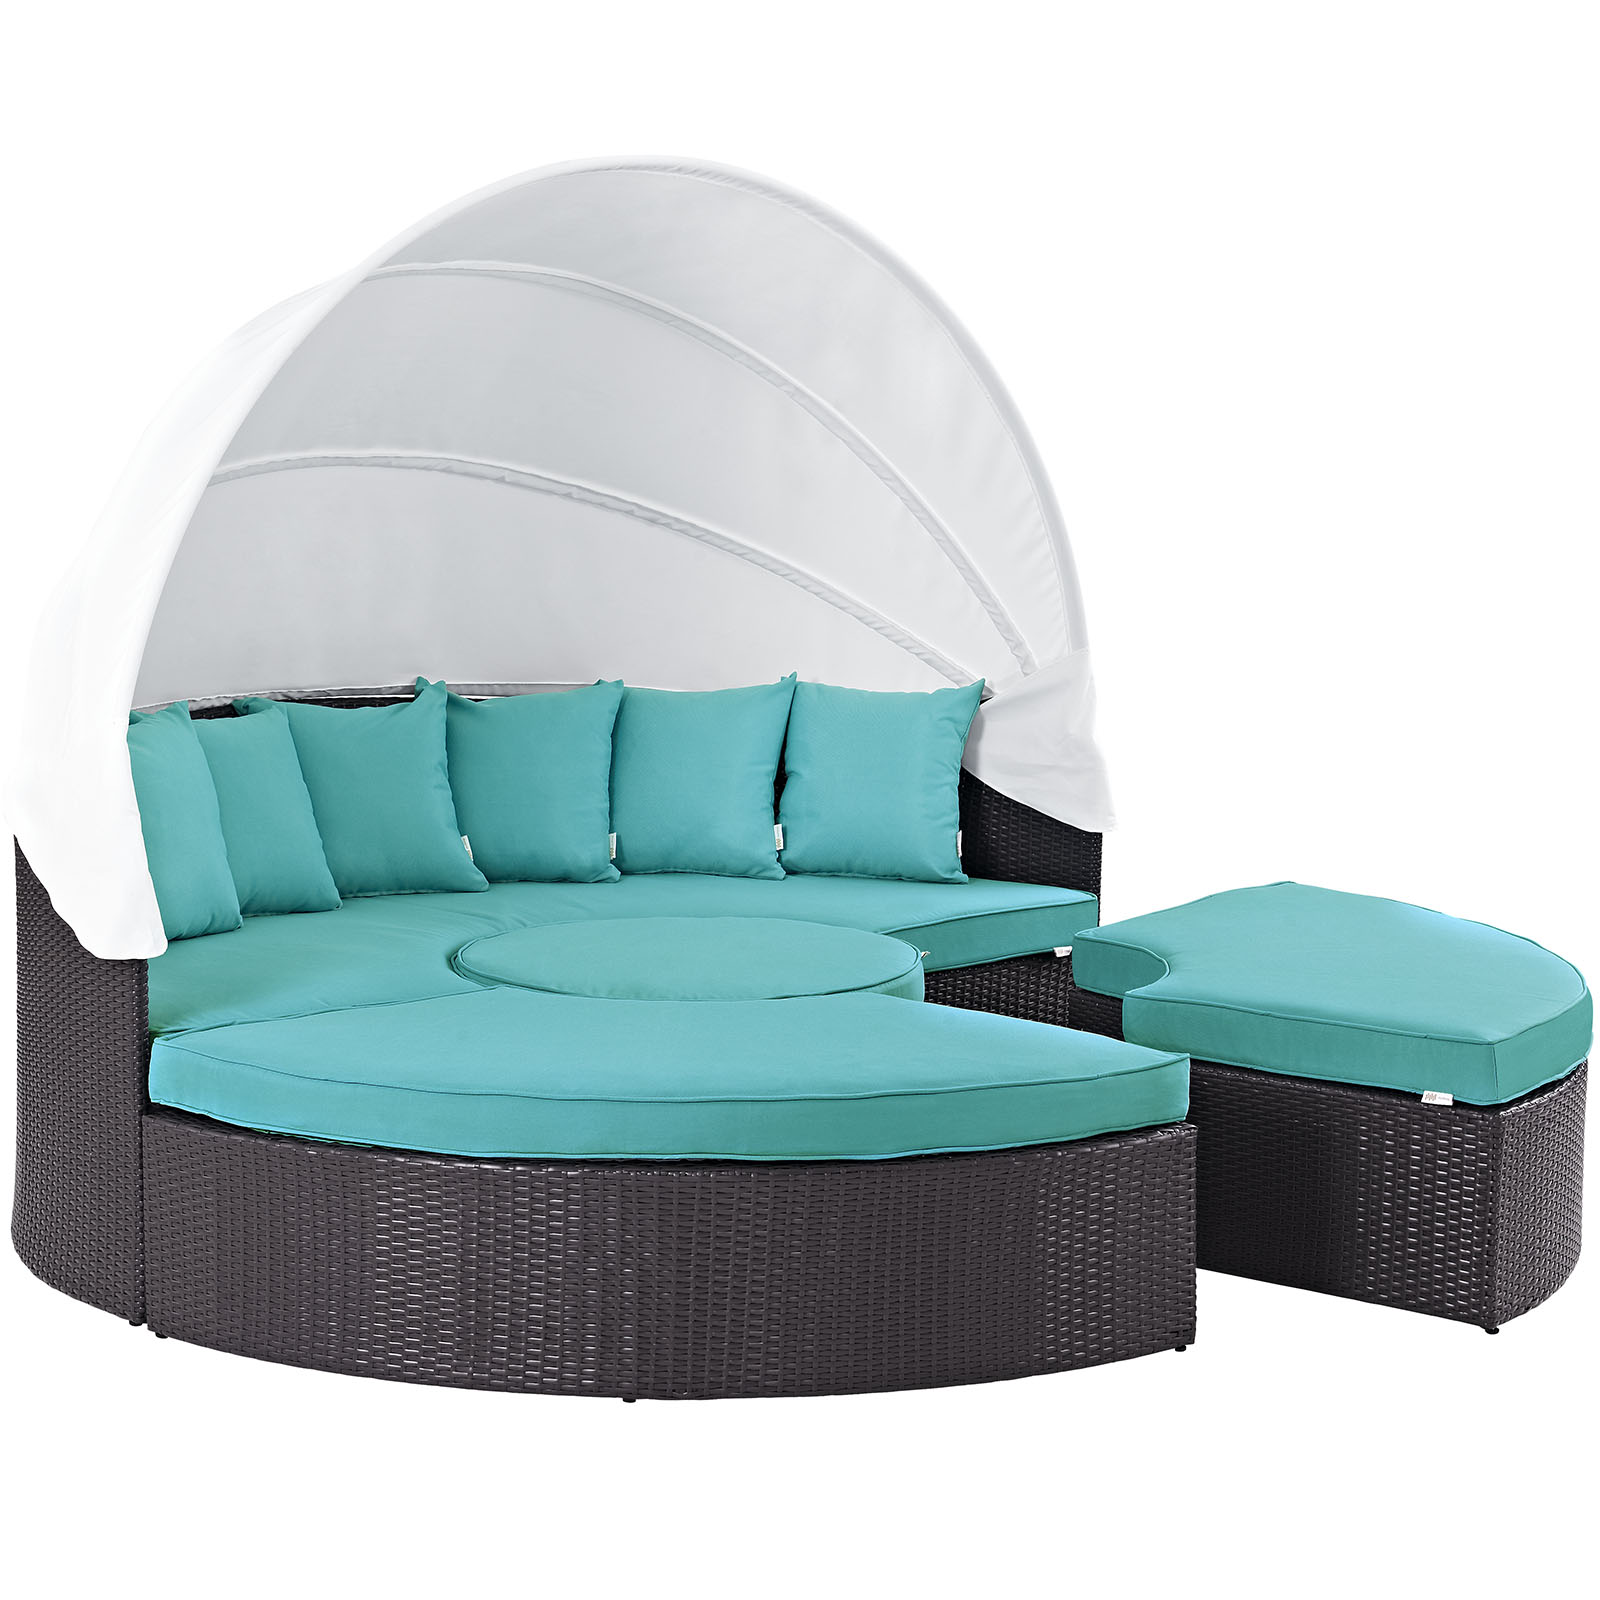 Modway Convene Canopy Outdoor Patio Daybed in Espresso Turquoise - image 3 of 6